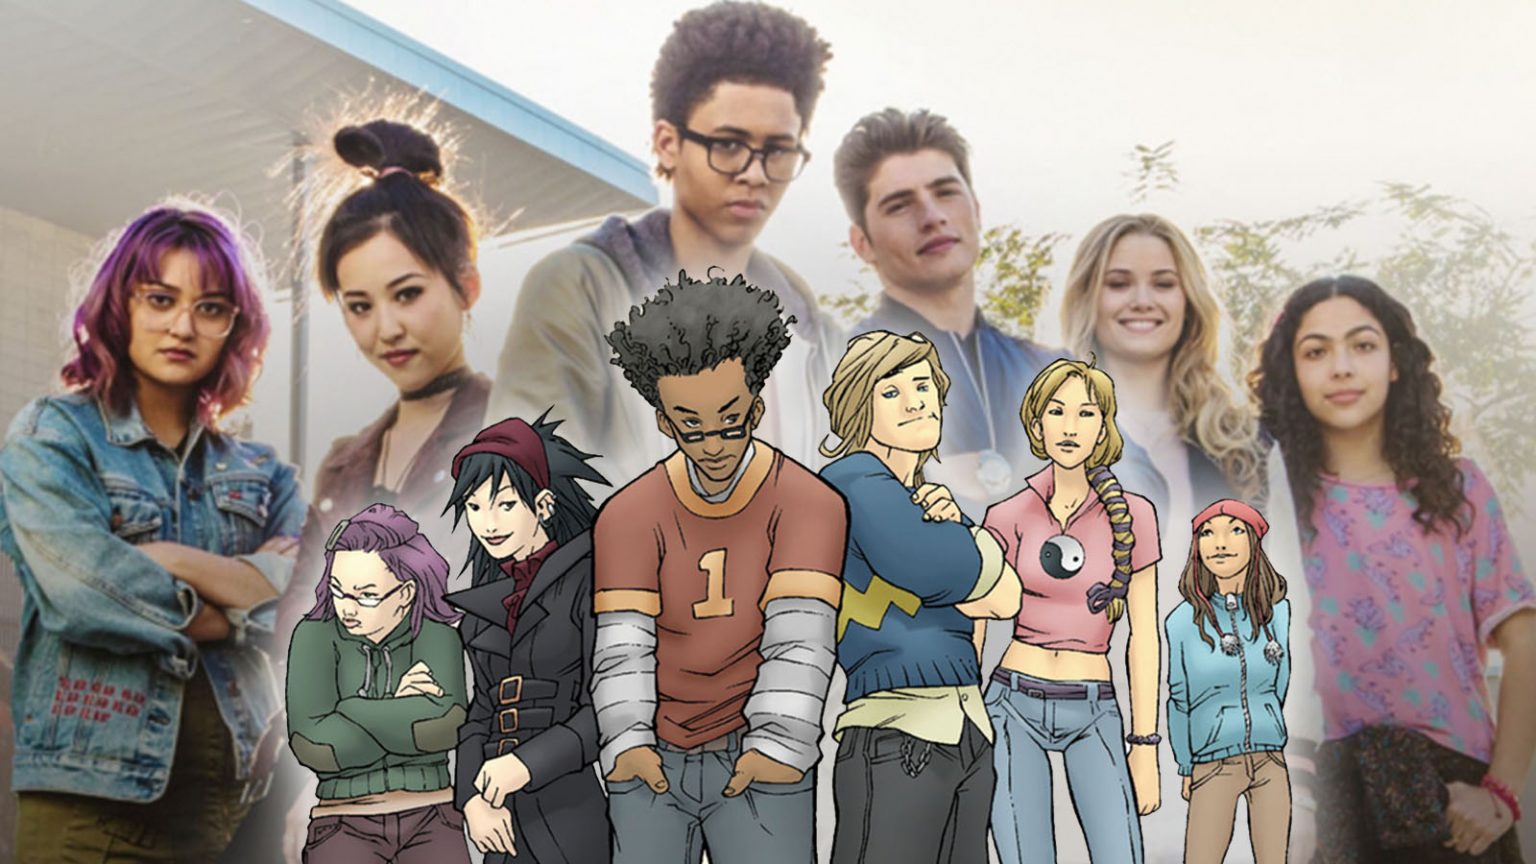 [Spoilers] Marvels Runaways Season 4, How They Will Fight